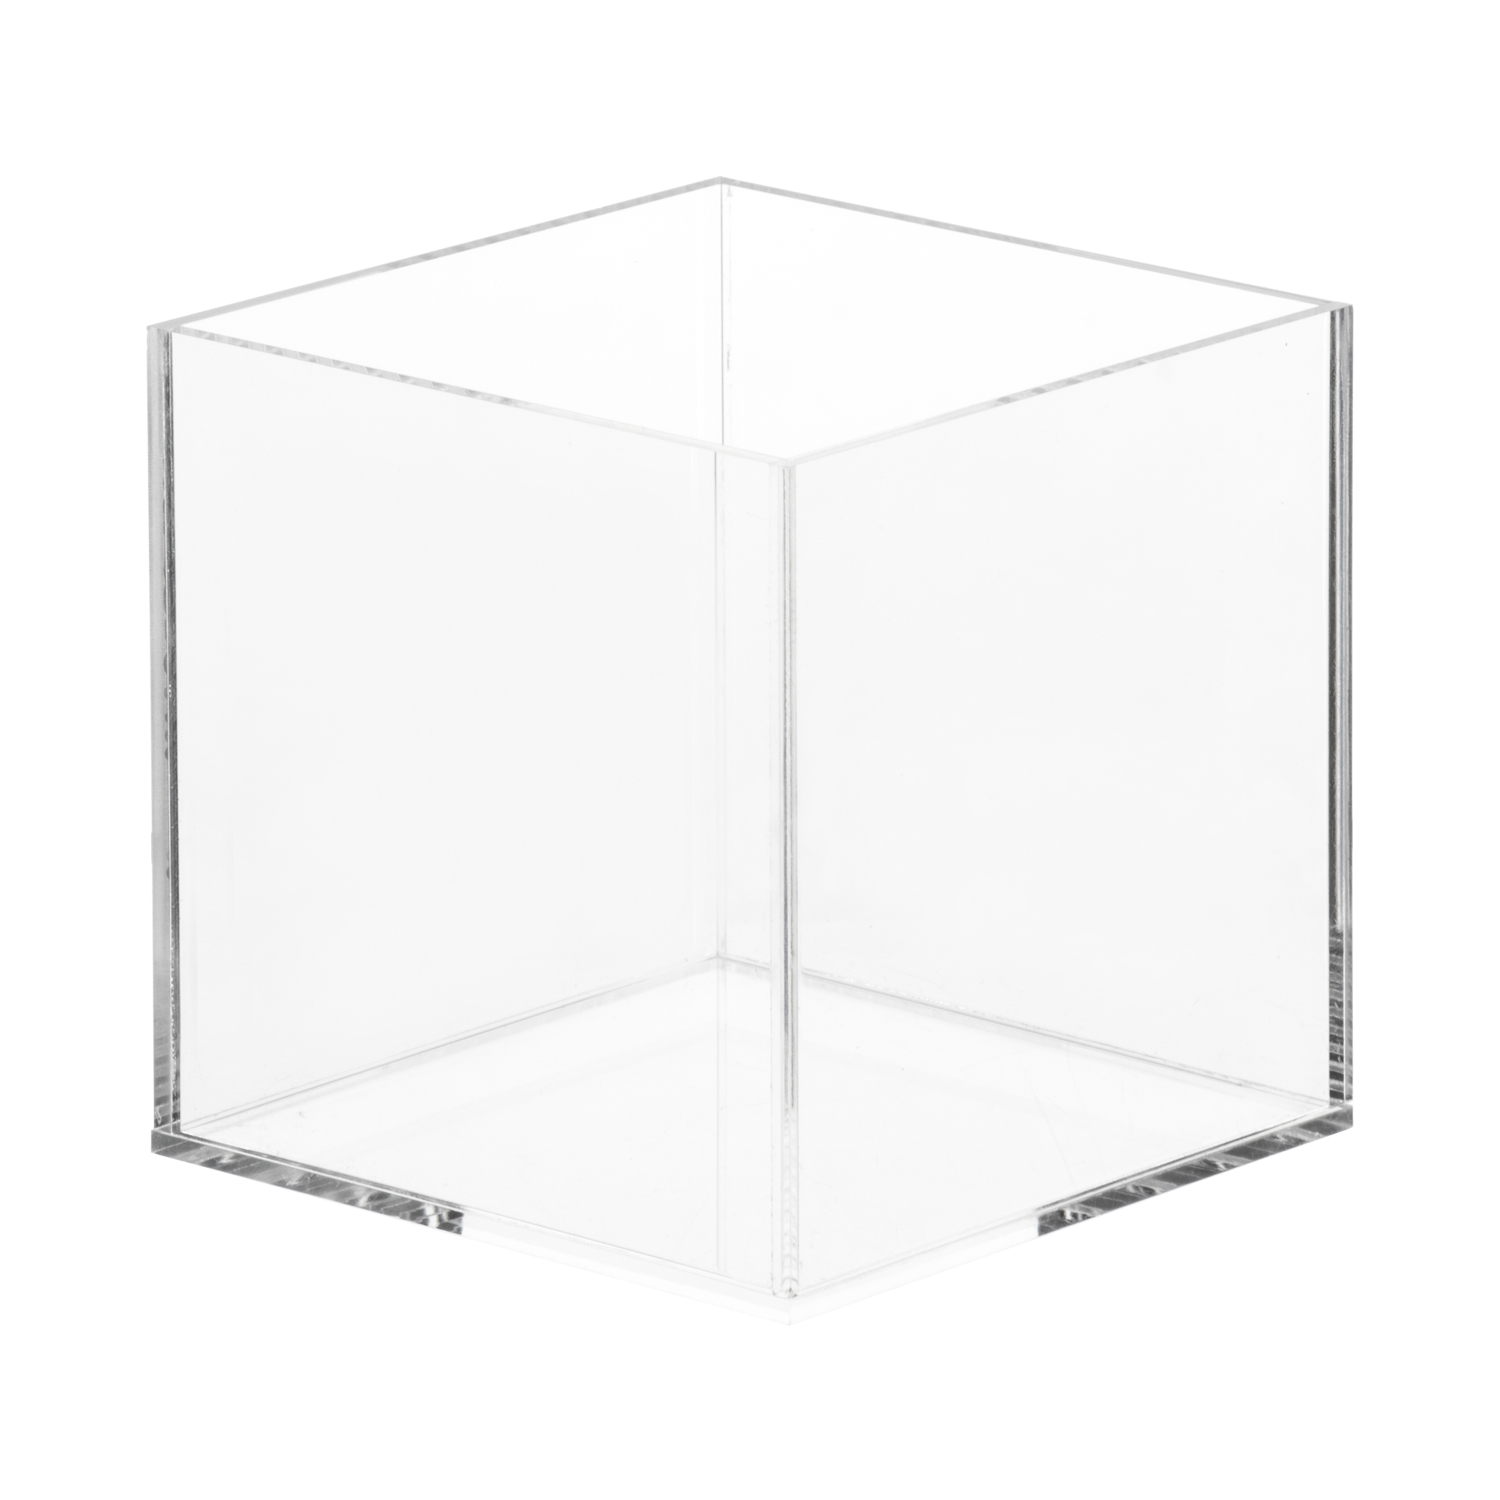 Details about   5 Sided Lucite Acrylic Cube Bin Display 8''L x 8''W x 8''H 